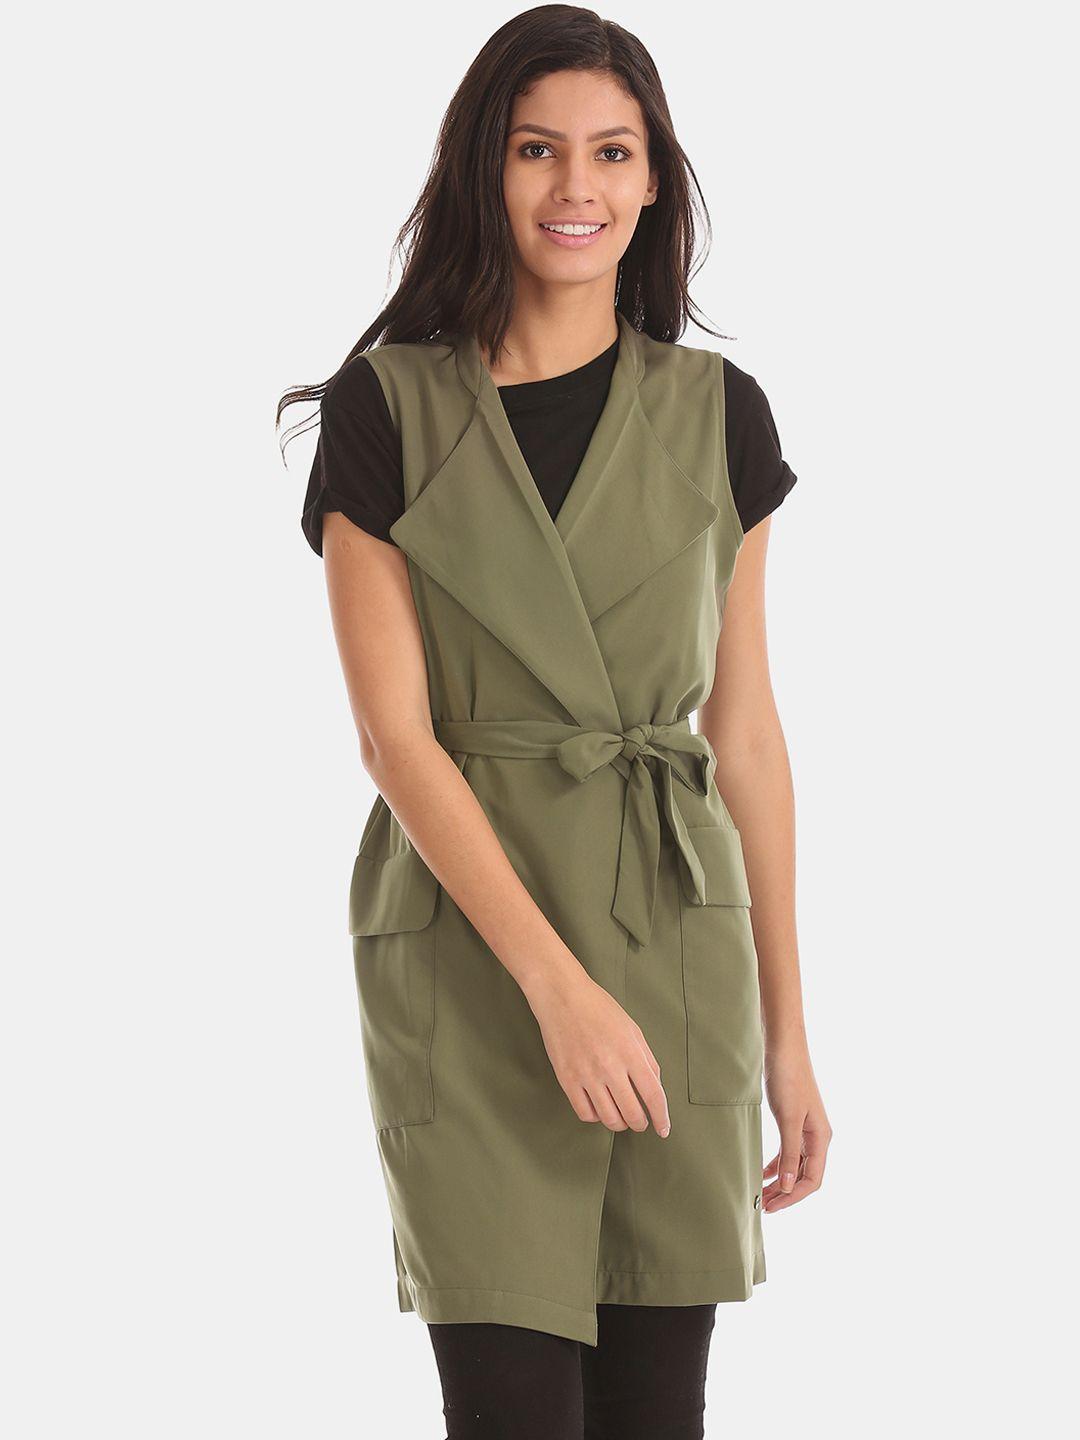 u.s. polo assn. women olive green solid open front longline shrug